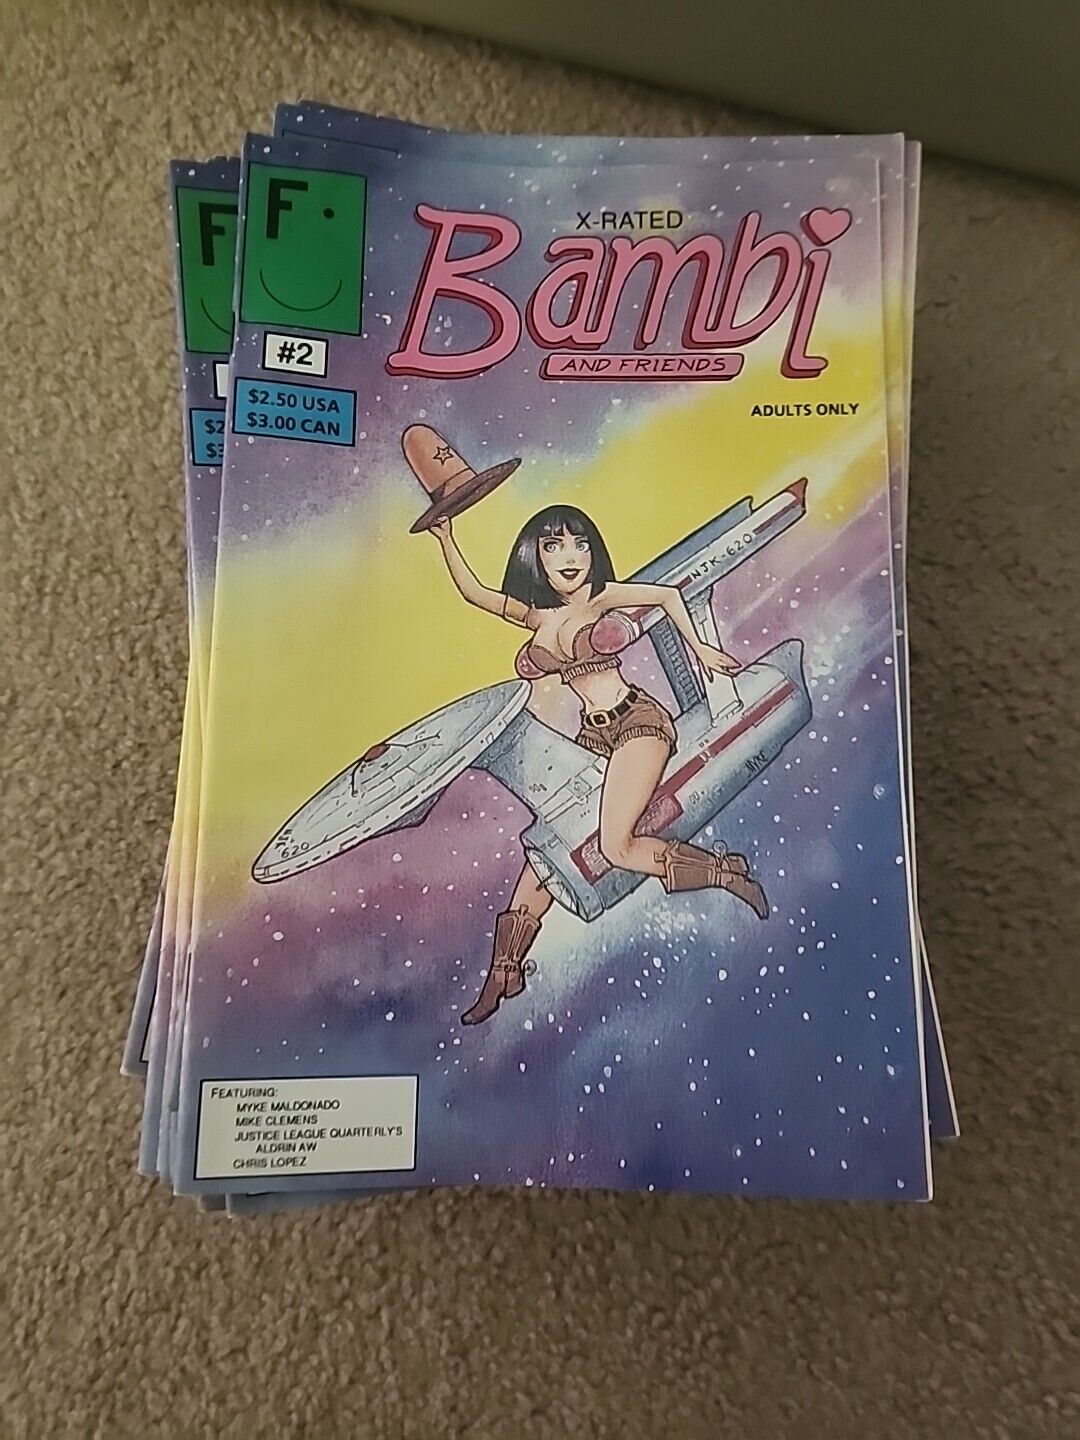 Bambi and Friends #2 (Friendly Comics, 1991) Vintage Rare Comic Book Issue